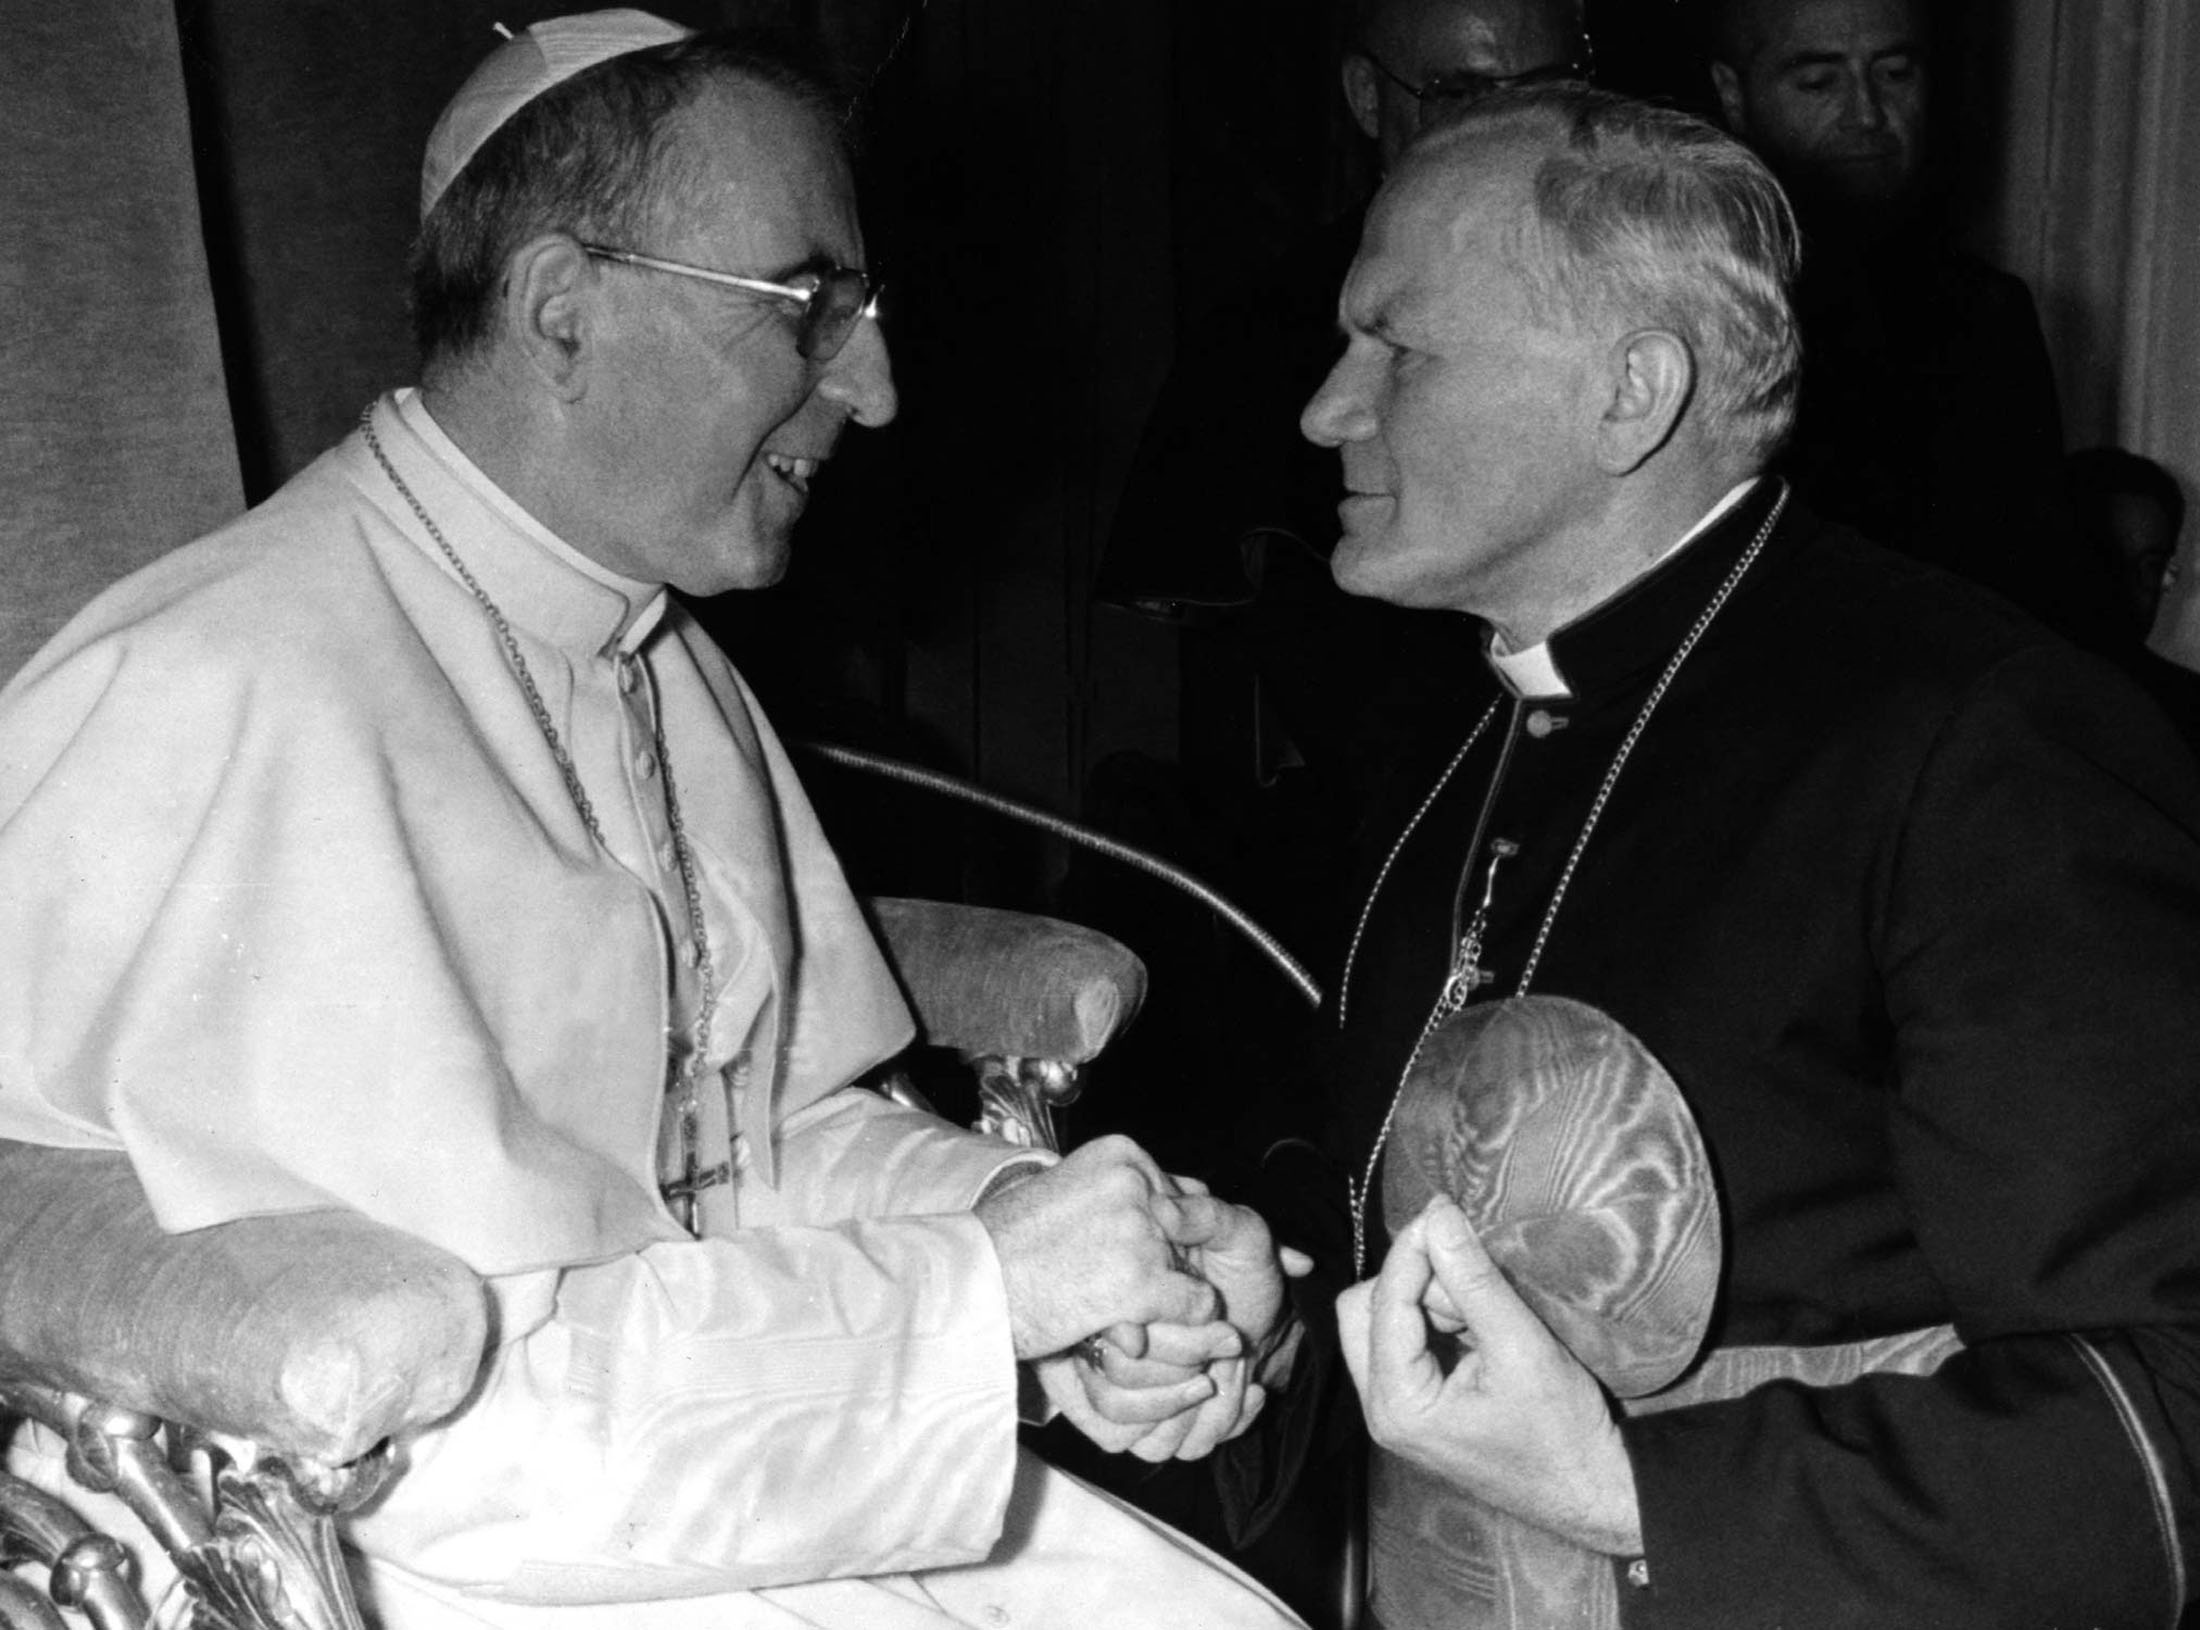 shoot scam Earliest John Paul I, pope who reigned for only 33 days, moves closer to sainthood |  Reuters